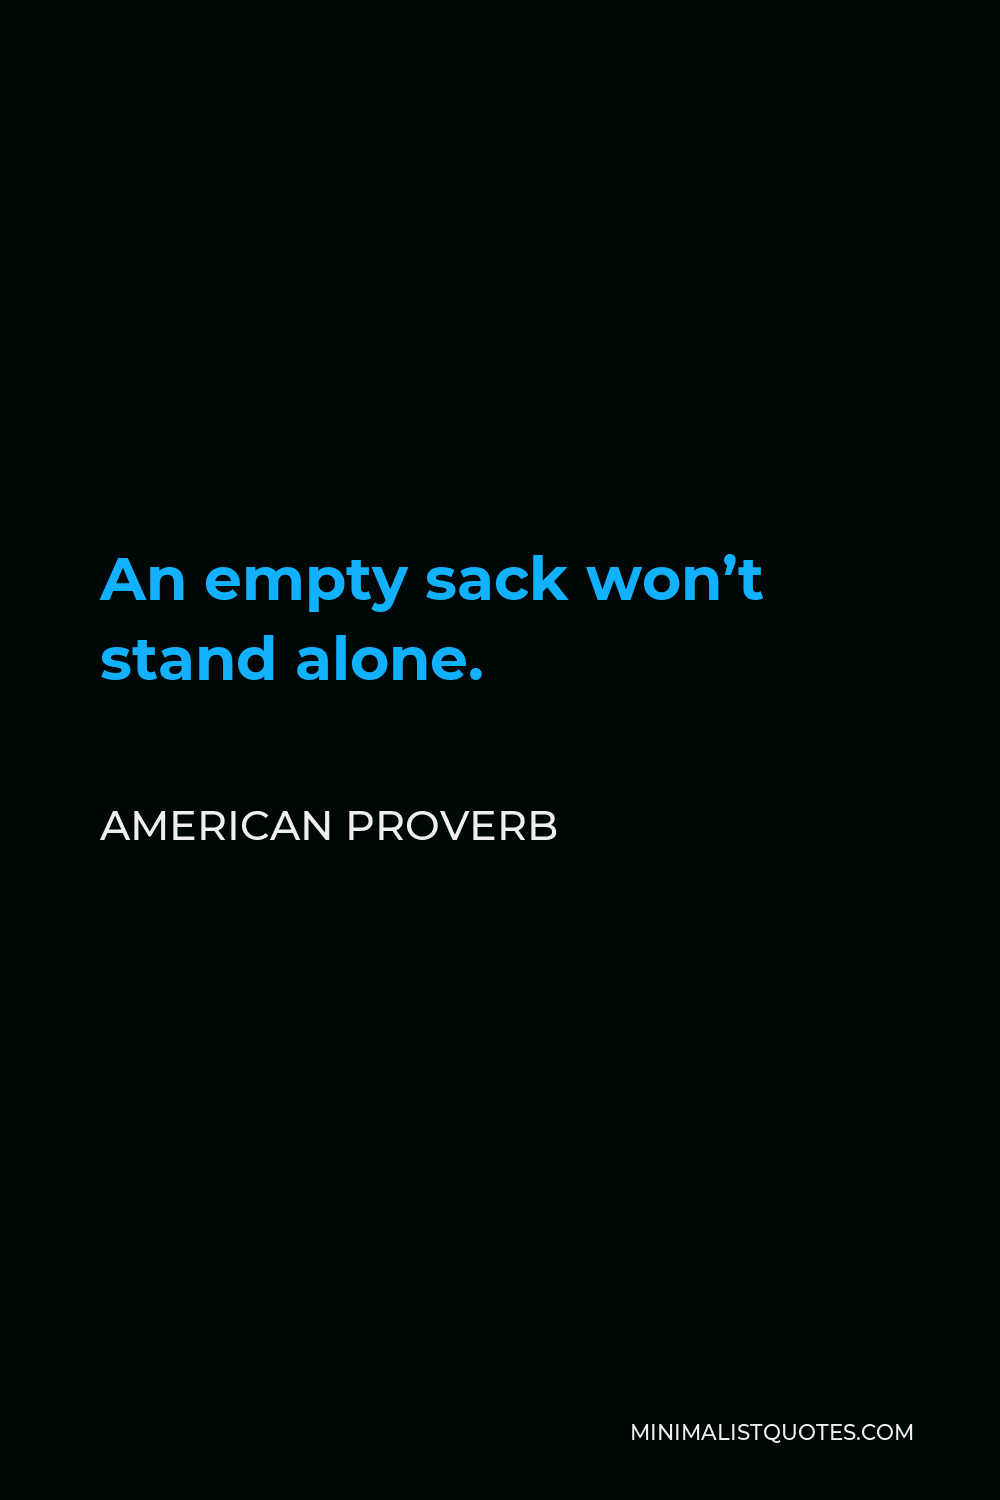 American Proverb Quote - An empty sack won’t stand alone.